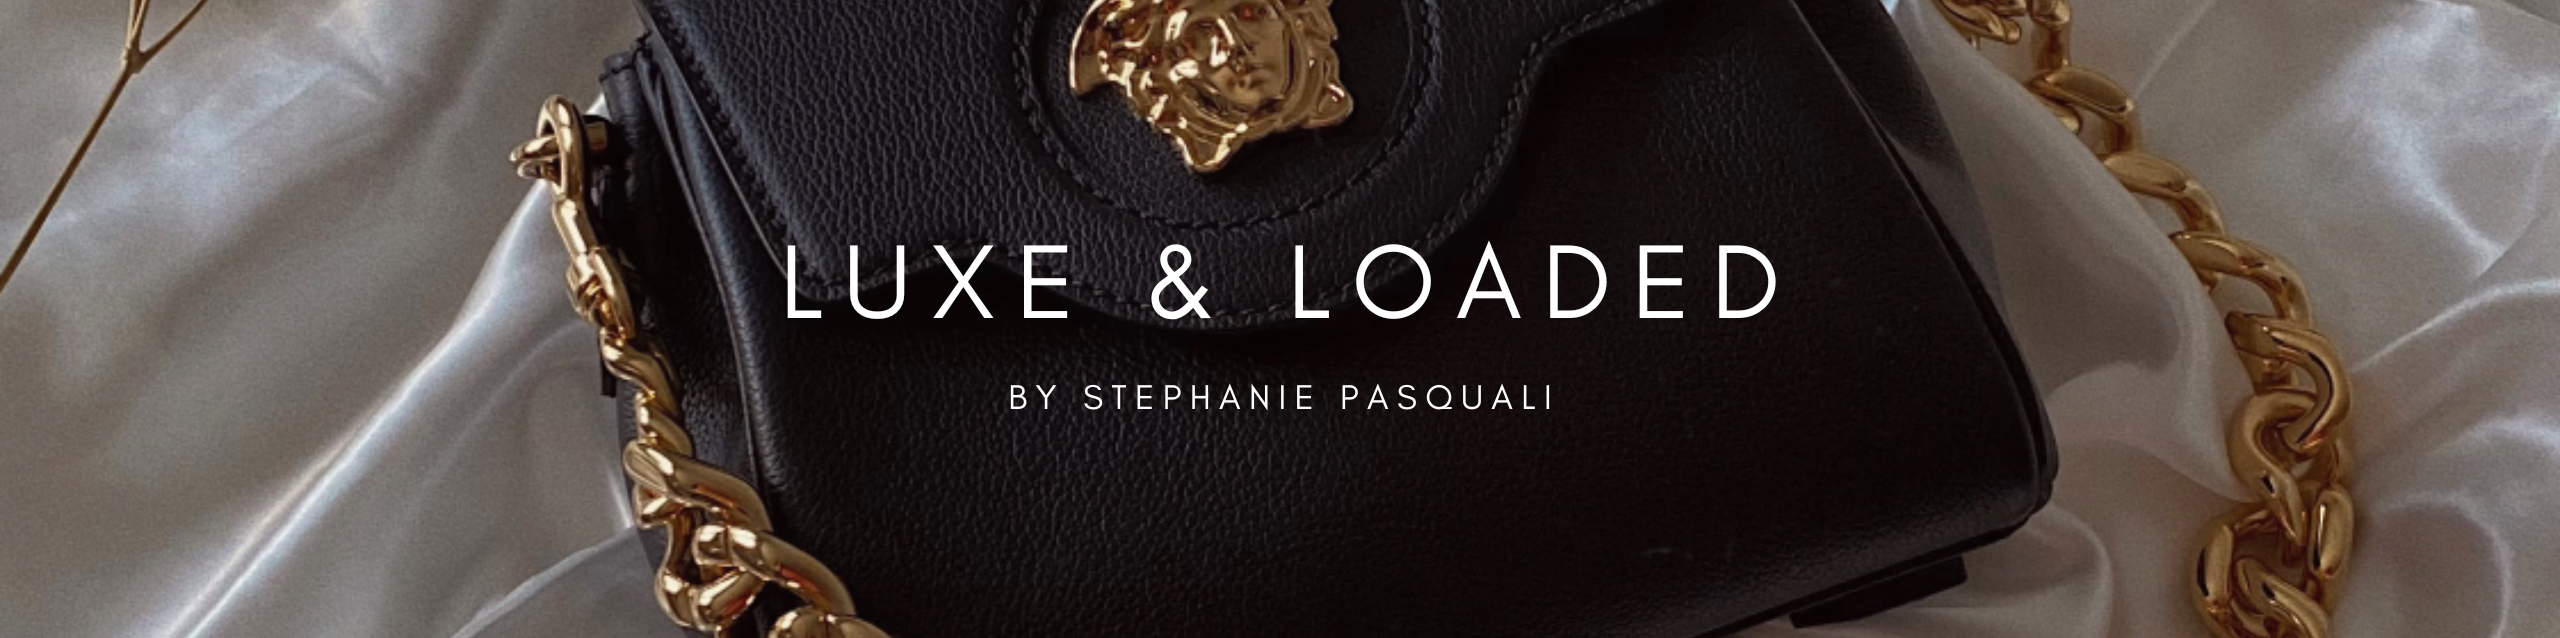 Luxe & Loaded by Stephanie Pasquali